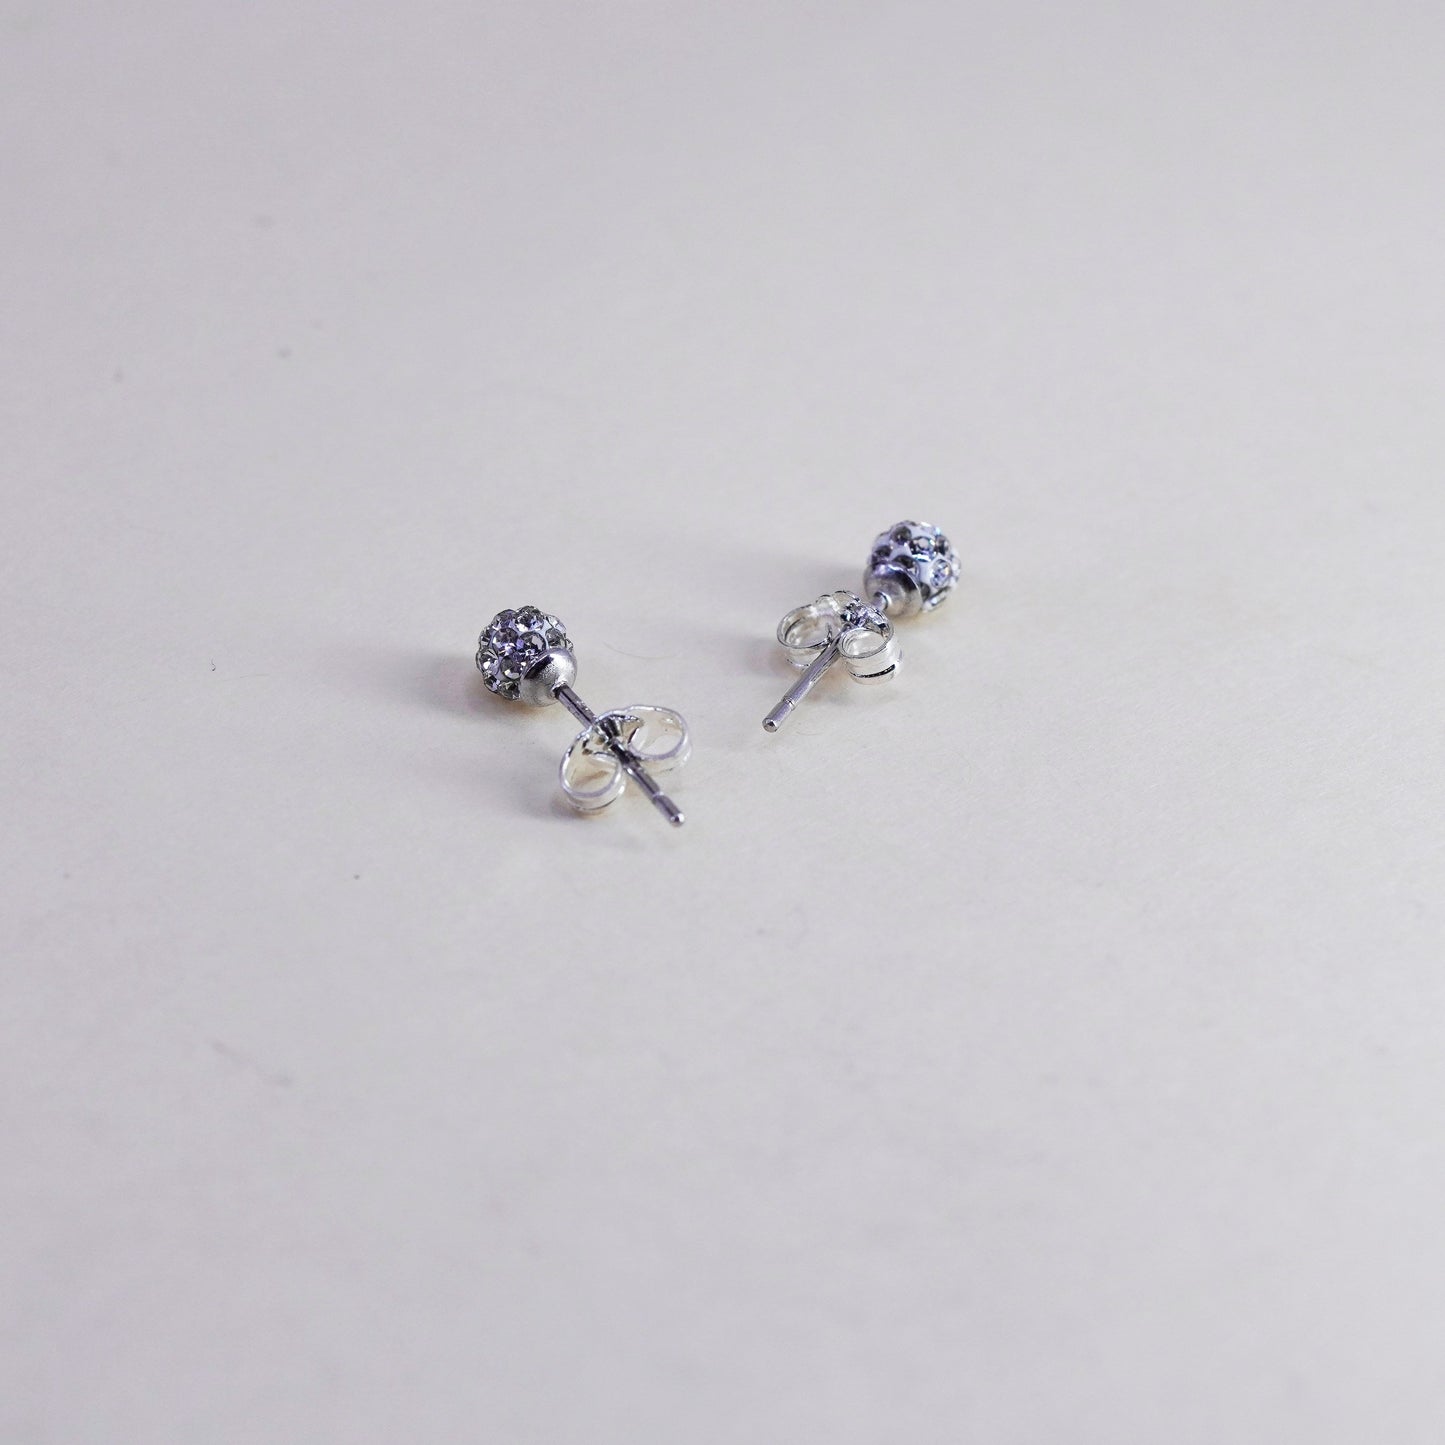 Vintage sterling silver handmade earrings, 925 silver studs with cluster cz